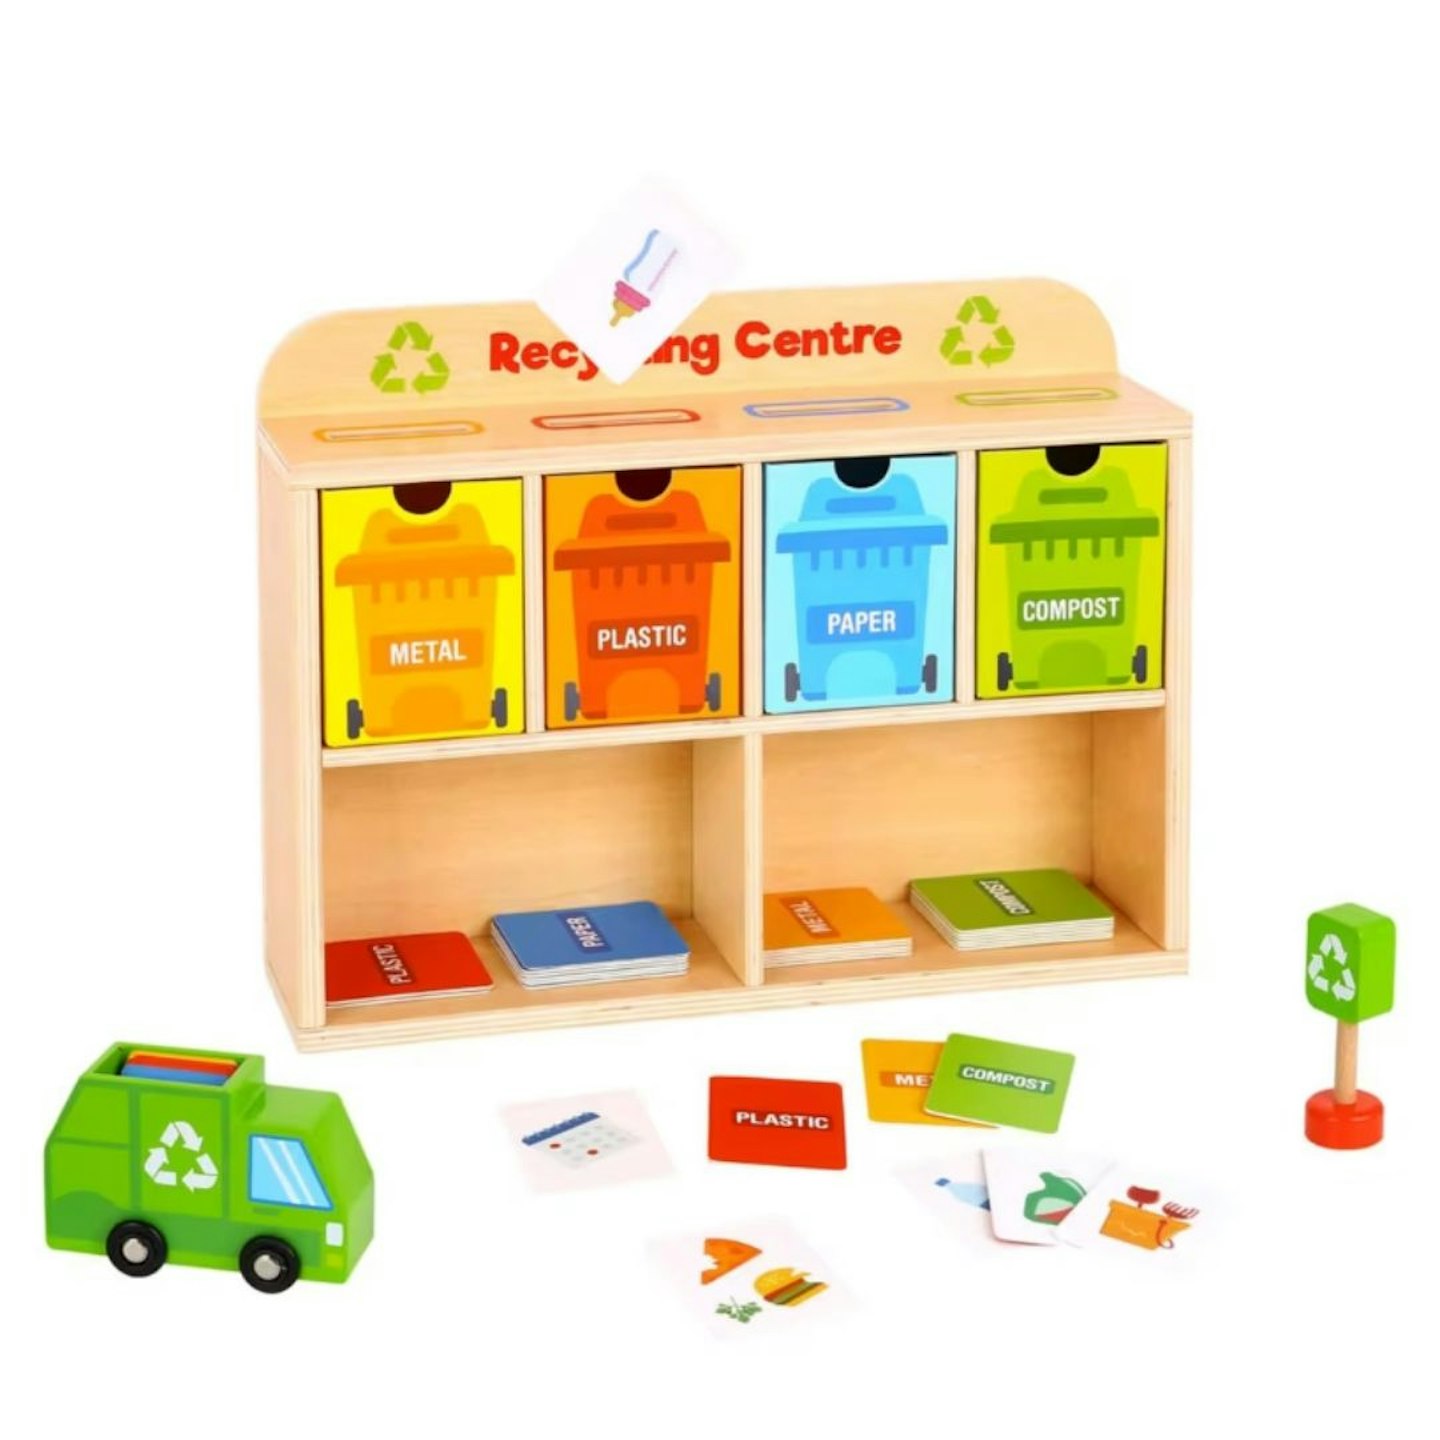 The Best Wooden Children's Toys: Tooky Toy Wooden Recycling Centre